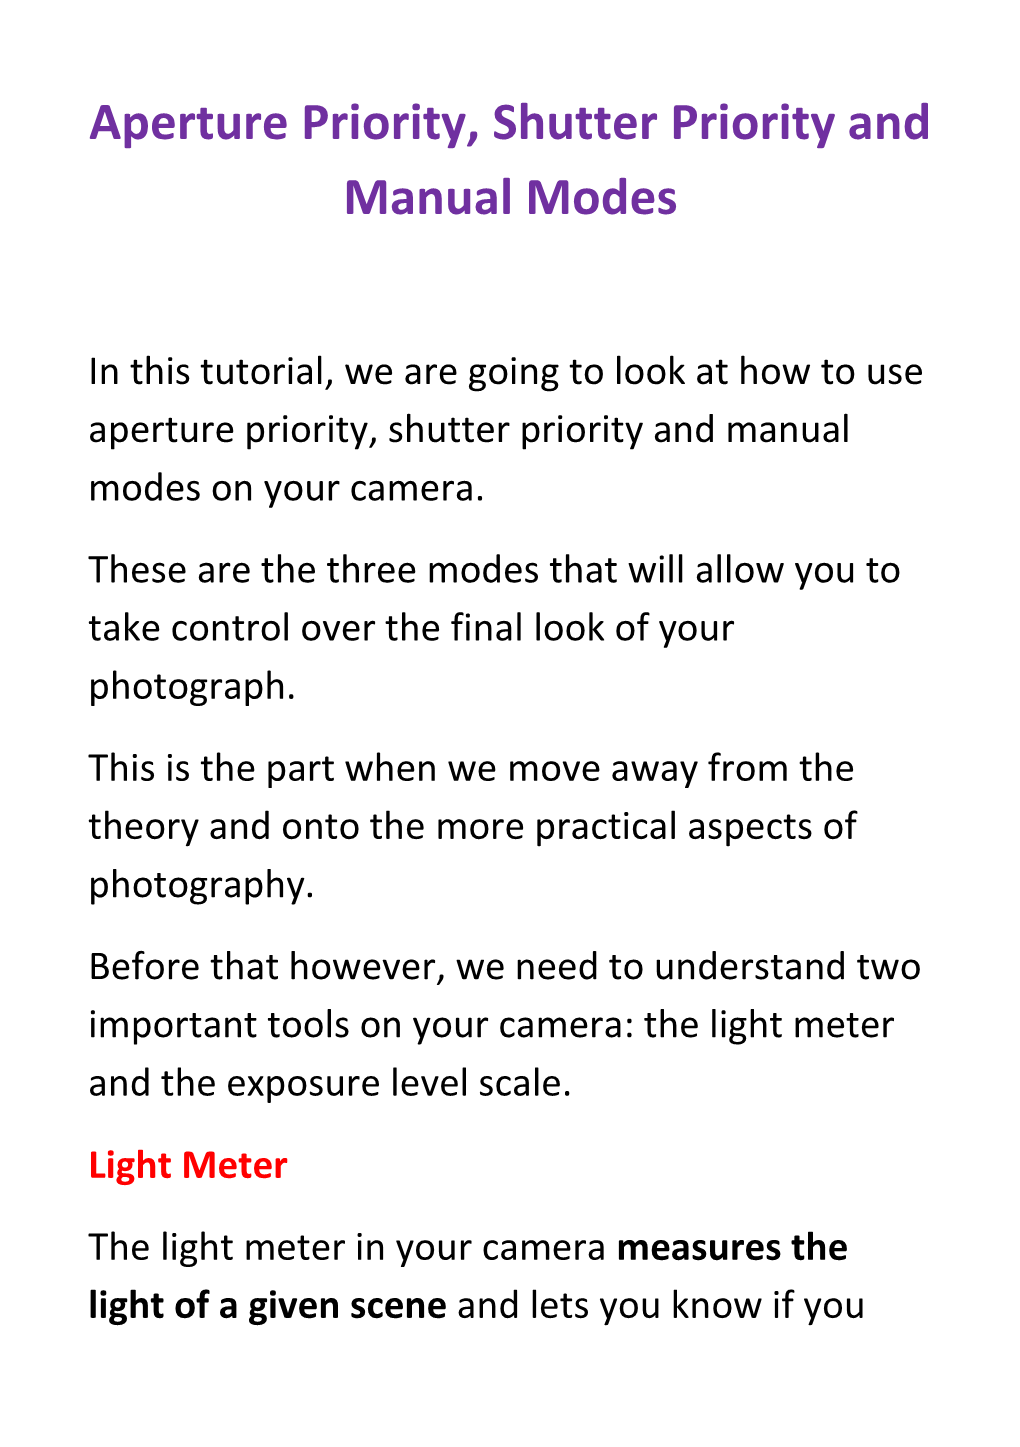 Aperture Priority, Shutter Priority and Manual Modes